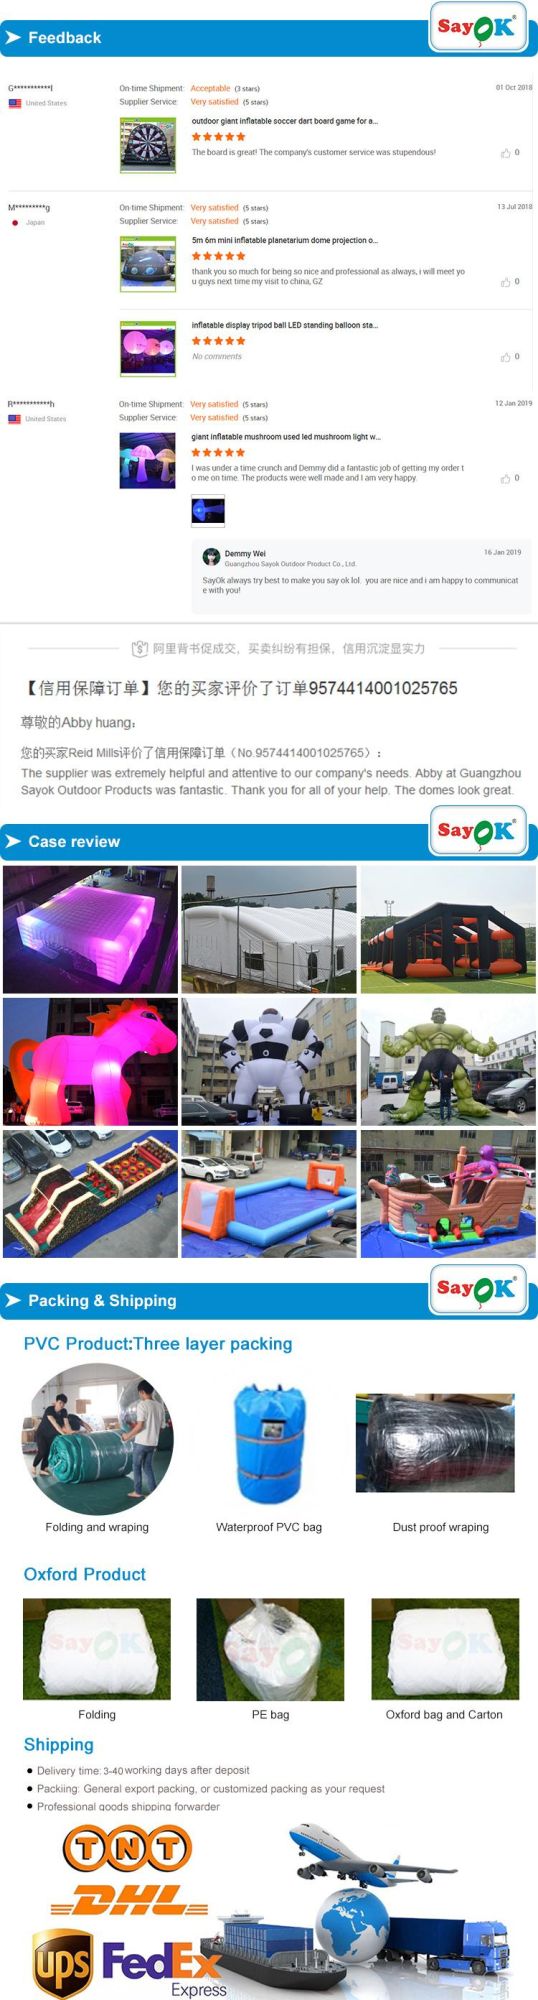 Funny Commercial Inflatable Soccer Field Bouncy Field Soccer Field